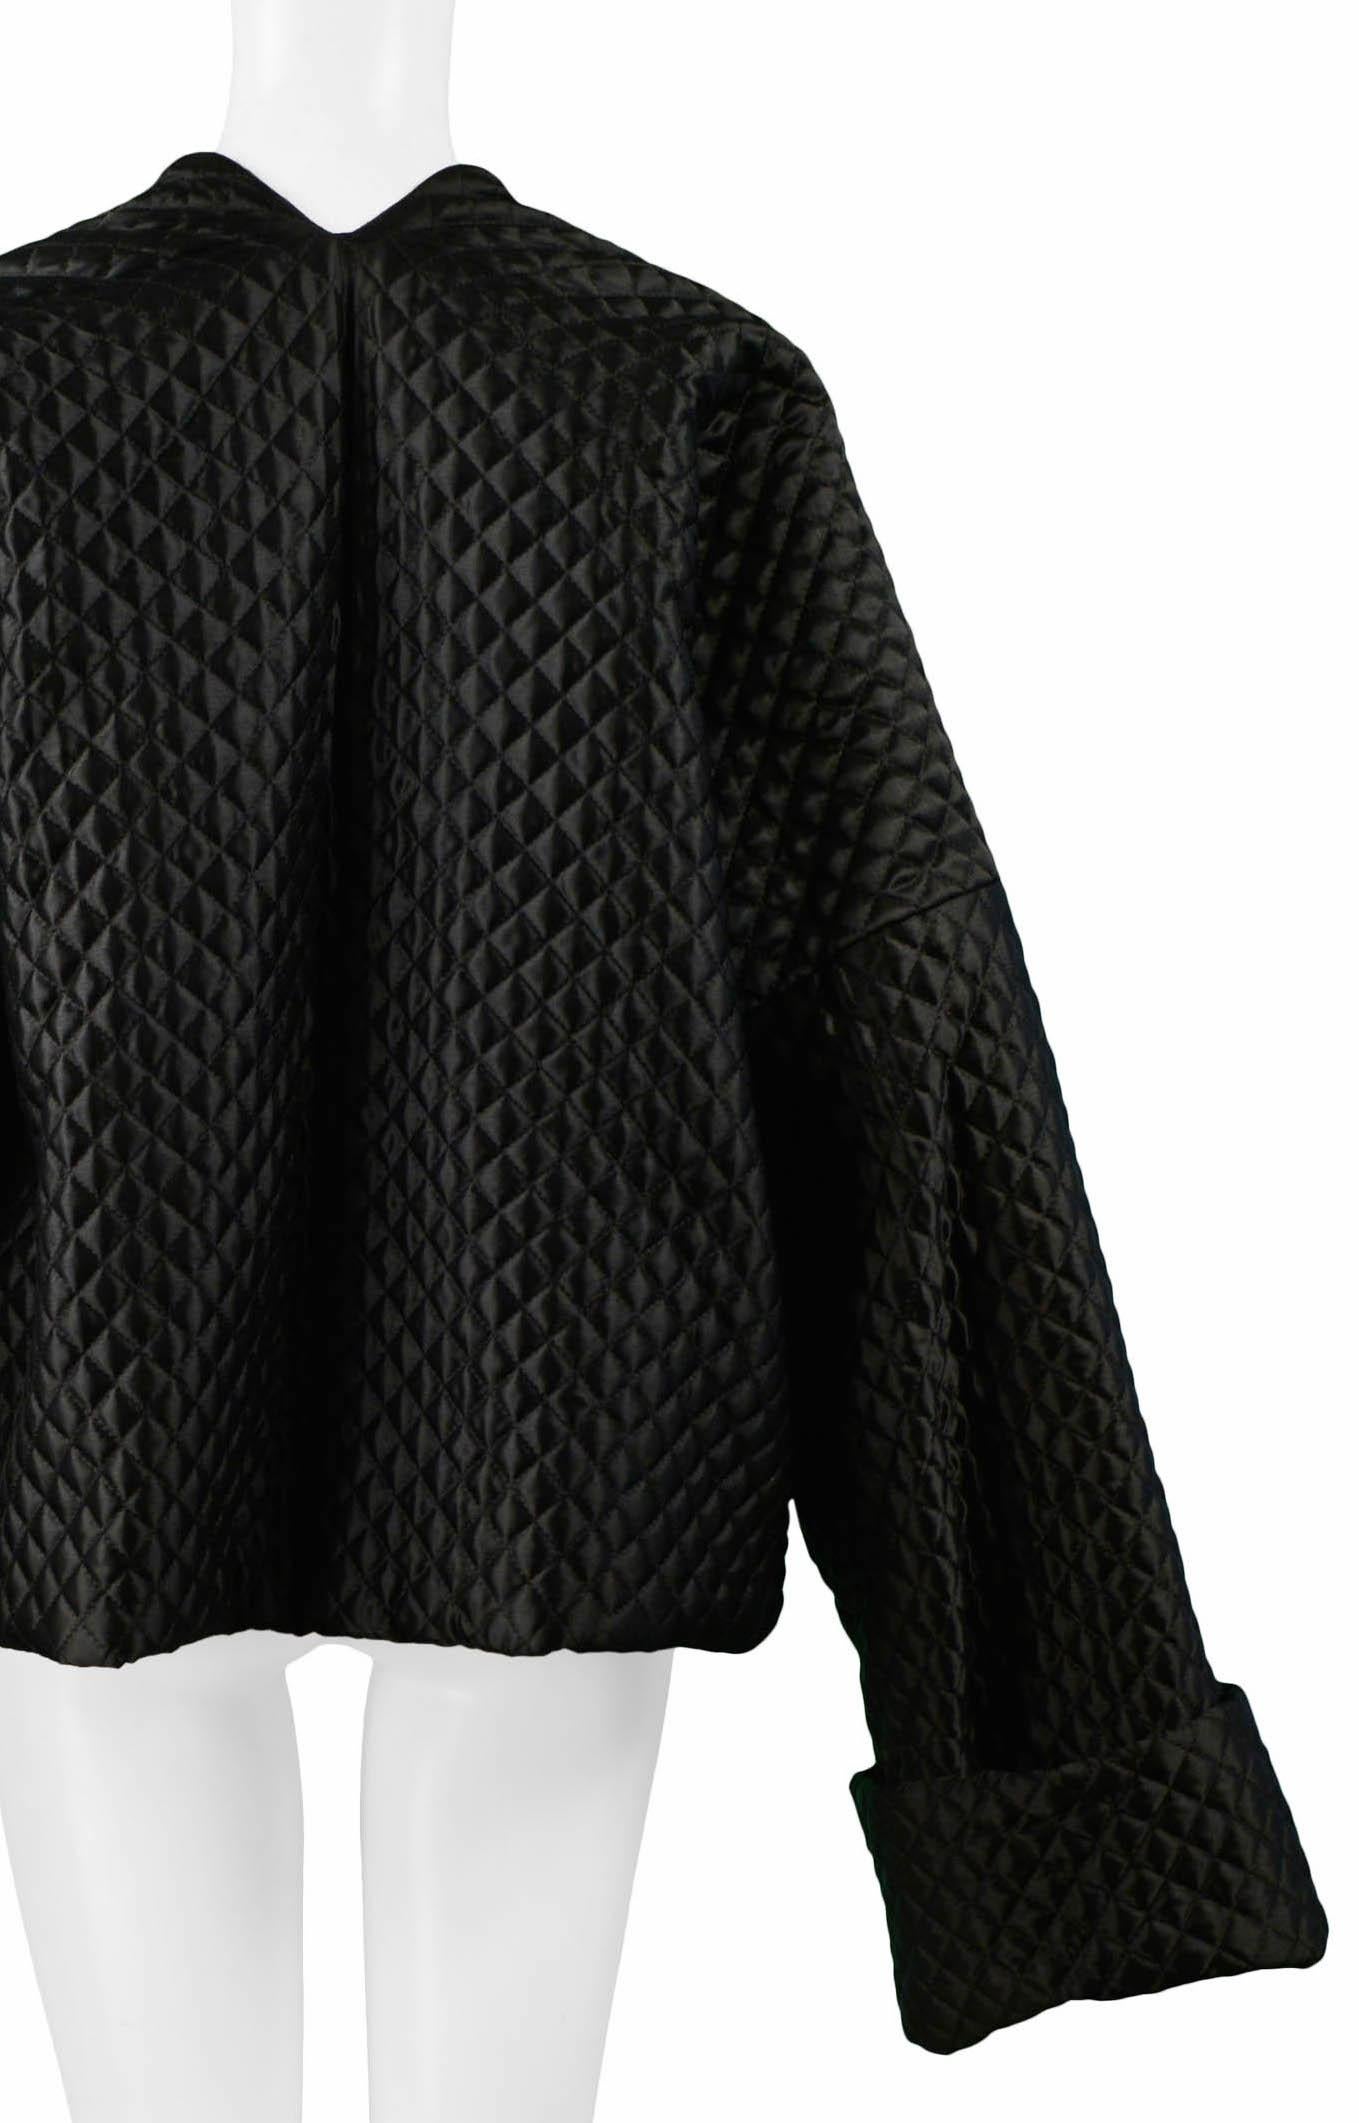 Dolce & Gabbana Black Quilted Rhombus Stitch Kimono Jacket 1994-95 In Excellent Condition In Los Angeles, CA